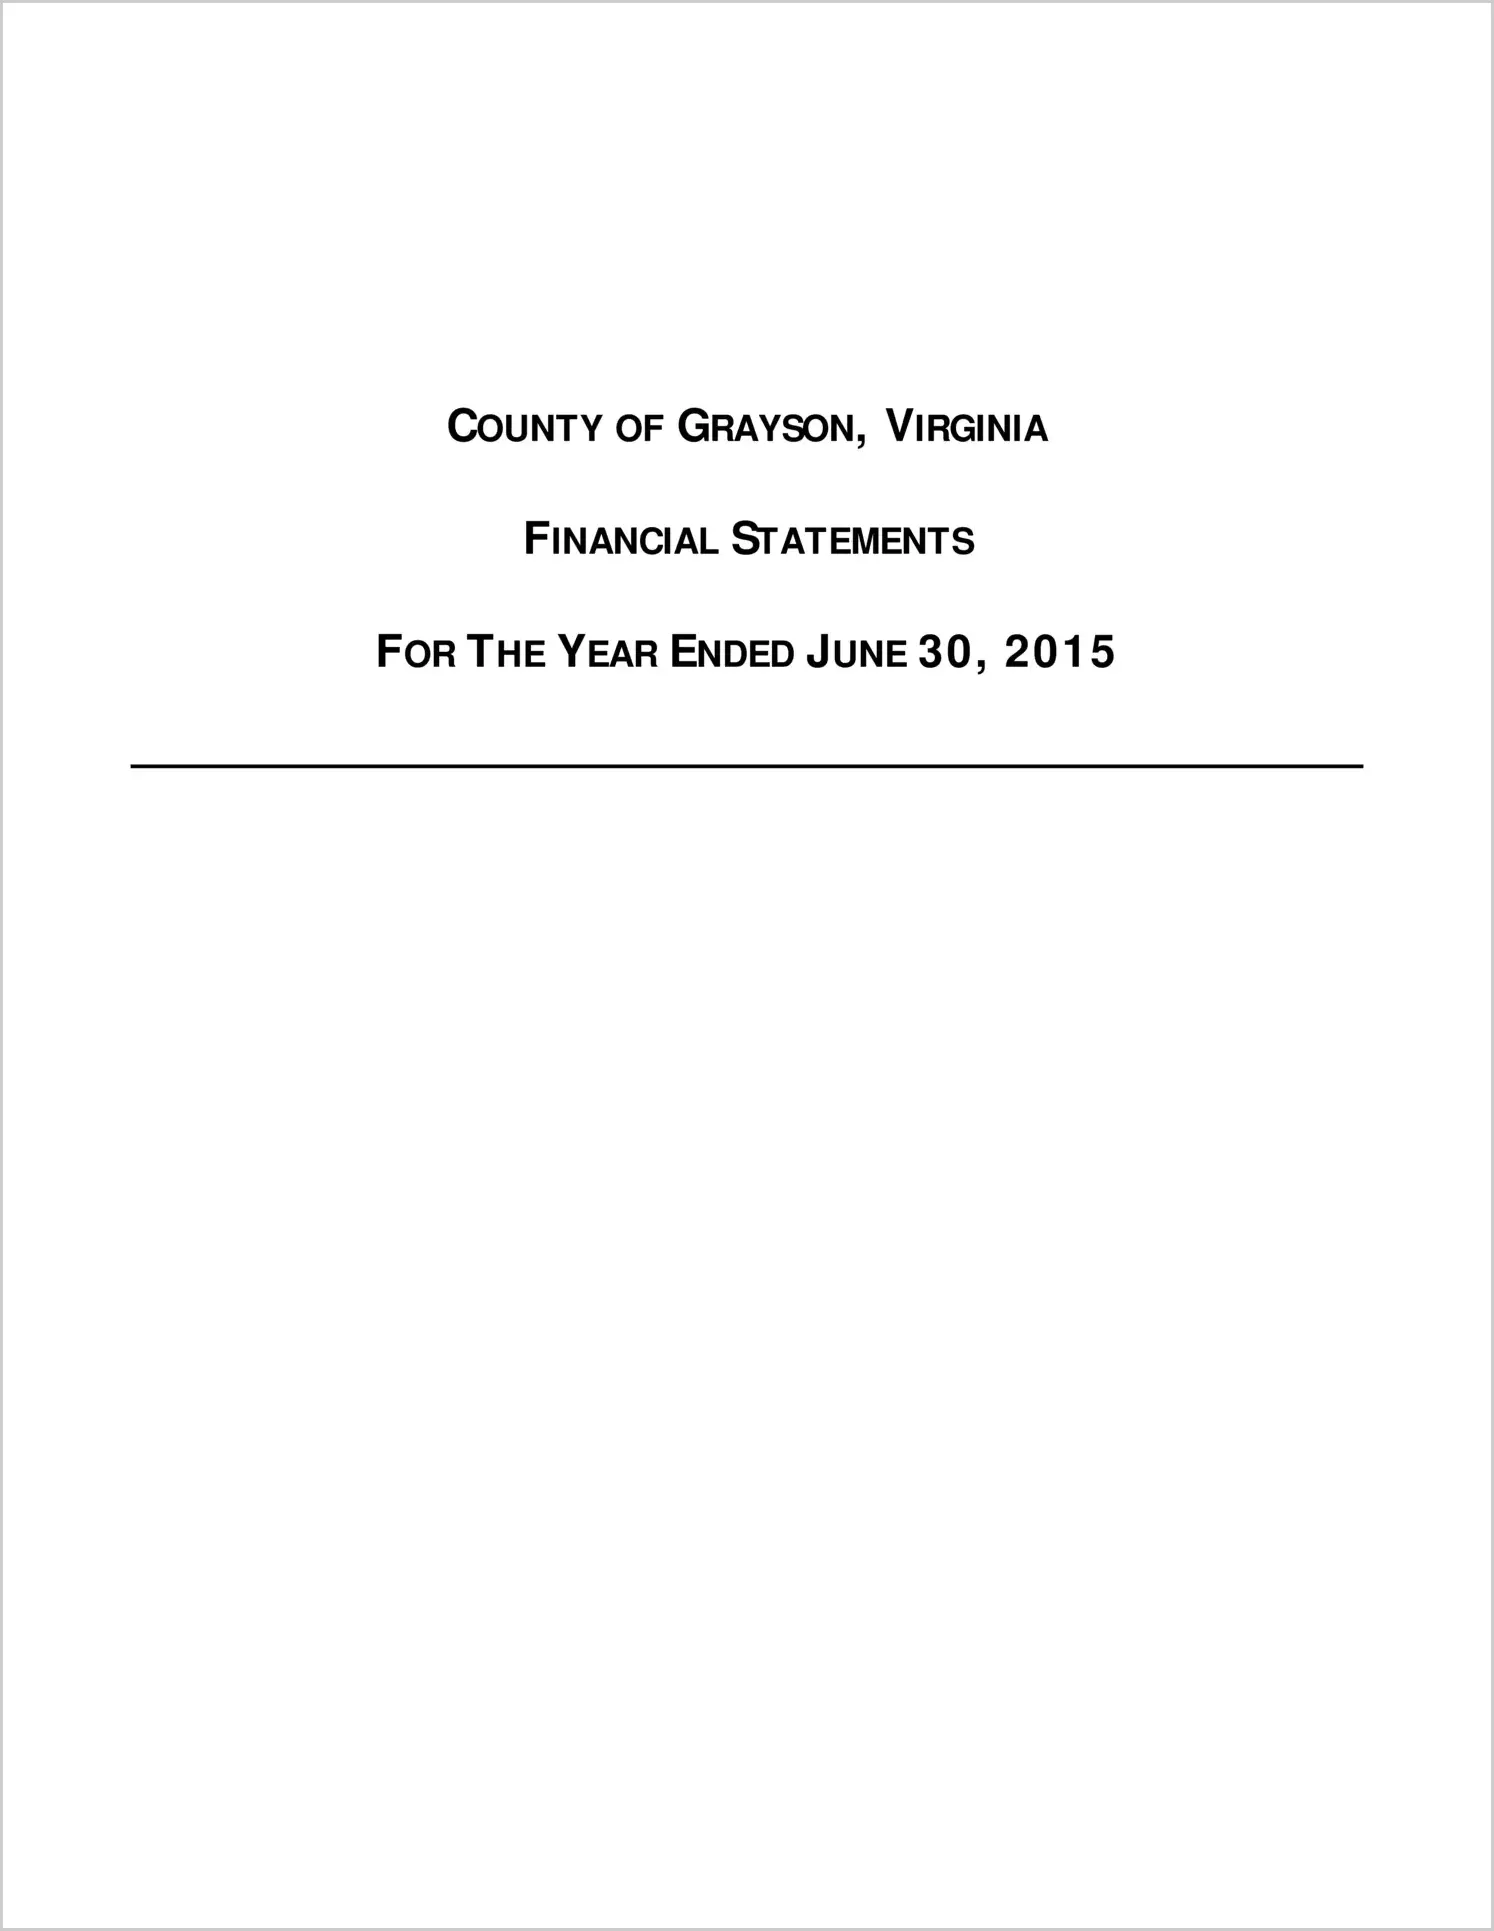 2015 Annual Financial Report for County of Grayson